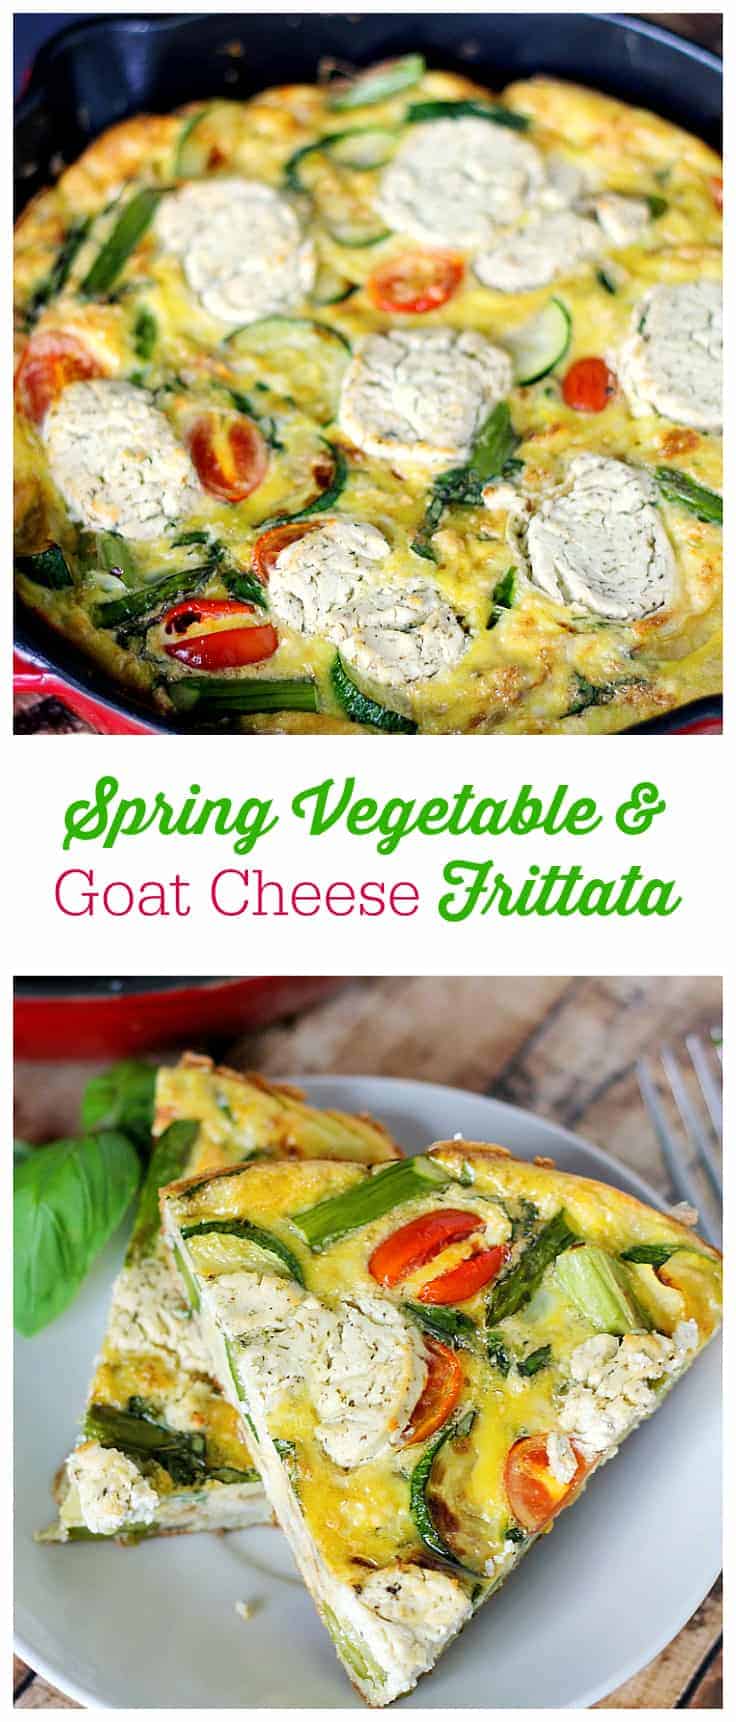 Spring Vegetable & Goat Cheese Frittata - Loaded with the fresh flavours of spring, featuring asparagus, zucchini, tomatoes and the creamy tang of goat cheese, this frittata is very versatile. It can be served warm or at room temperature and is a great breakfast, lunch, or paired with salad, and quick, light dinner option.